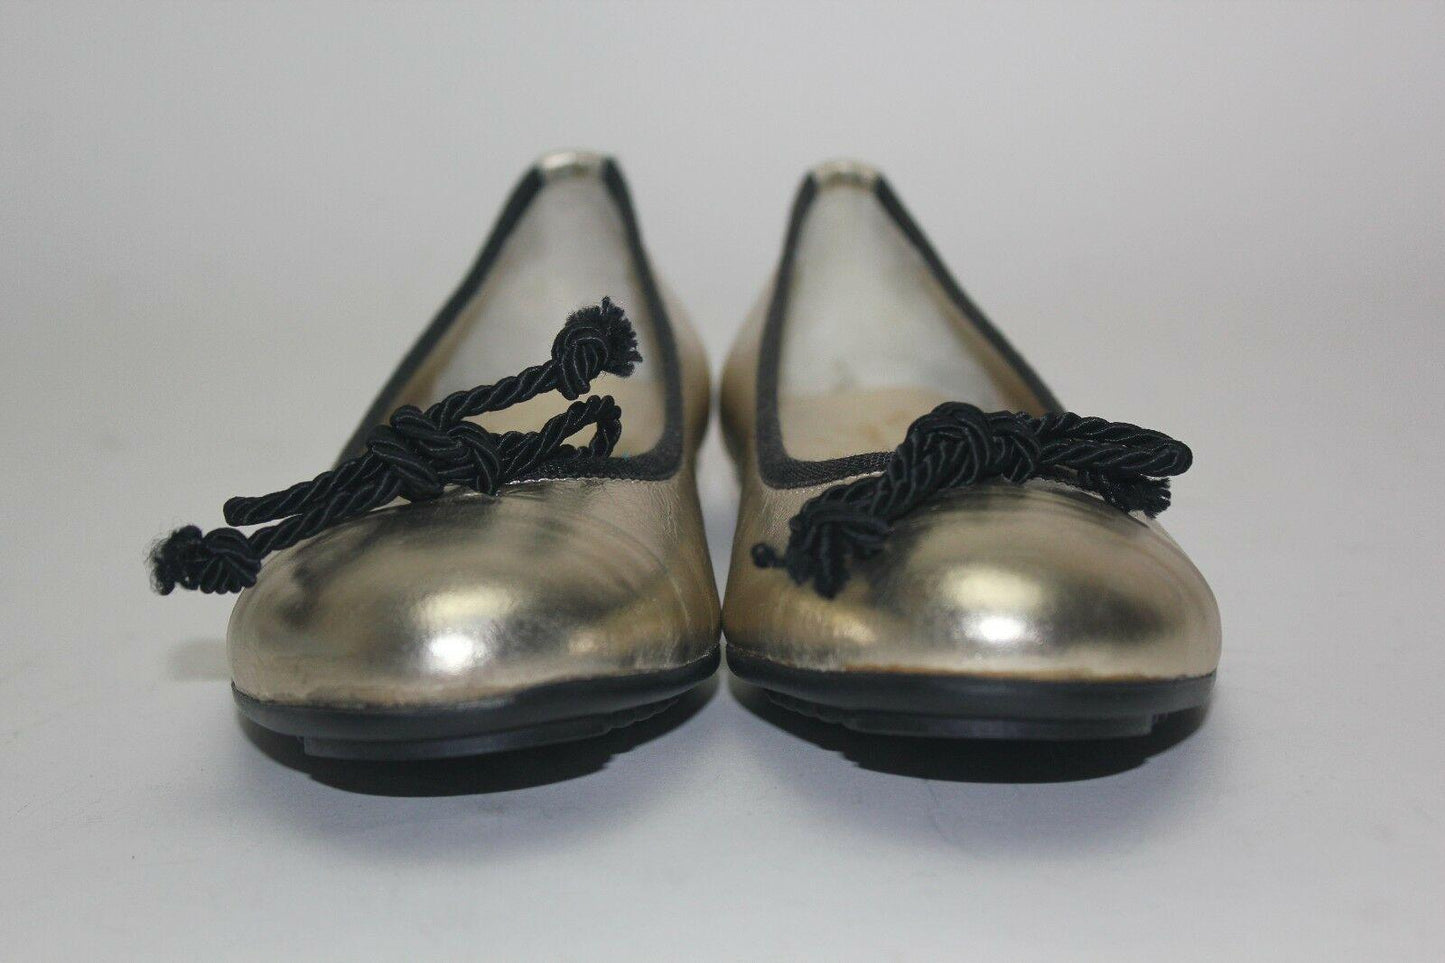 Vivi G Womens Metallic Gold Leather Ballet Flats Shoes Size 36 Made in Italy - SVNYFancy